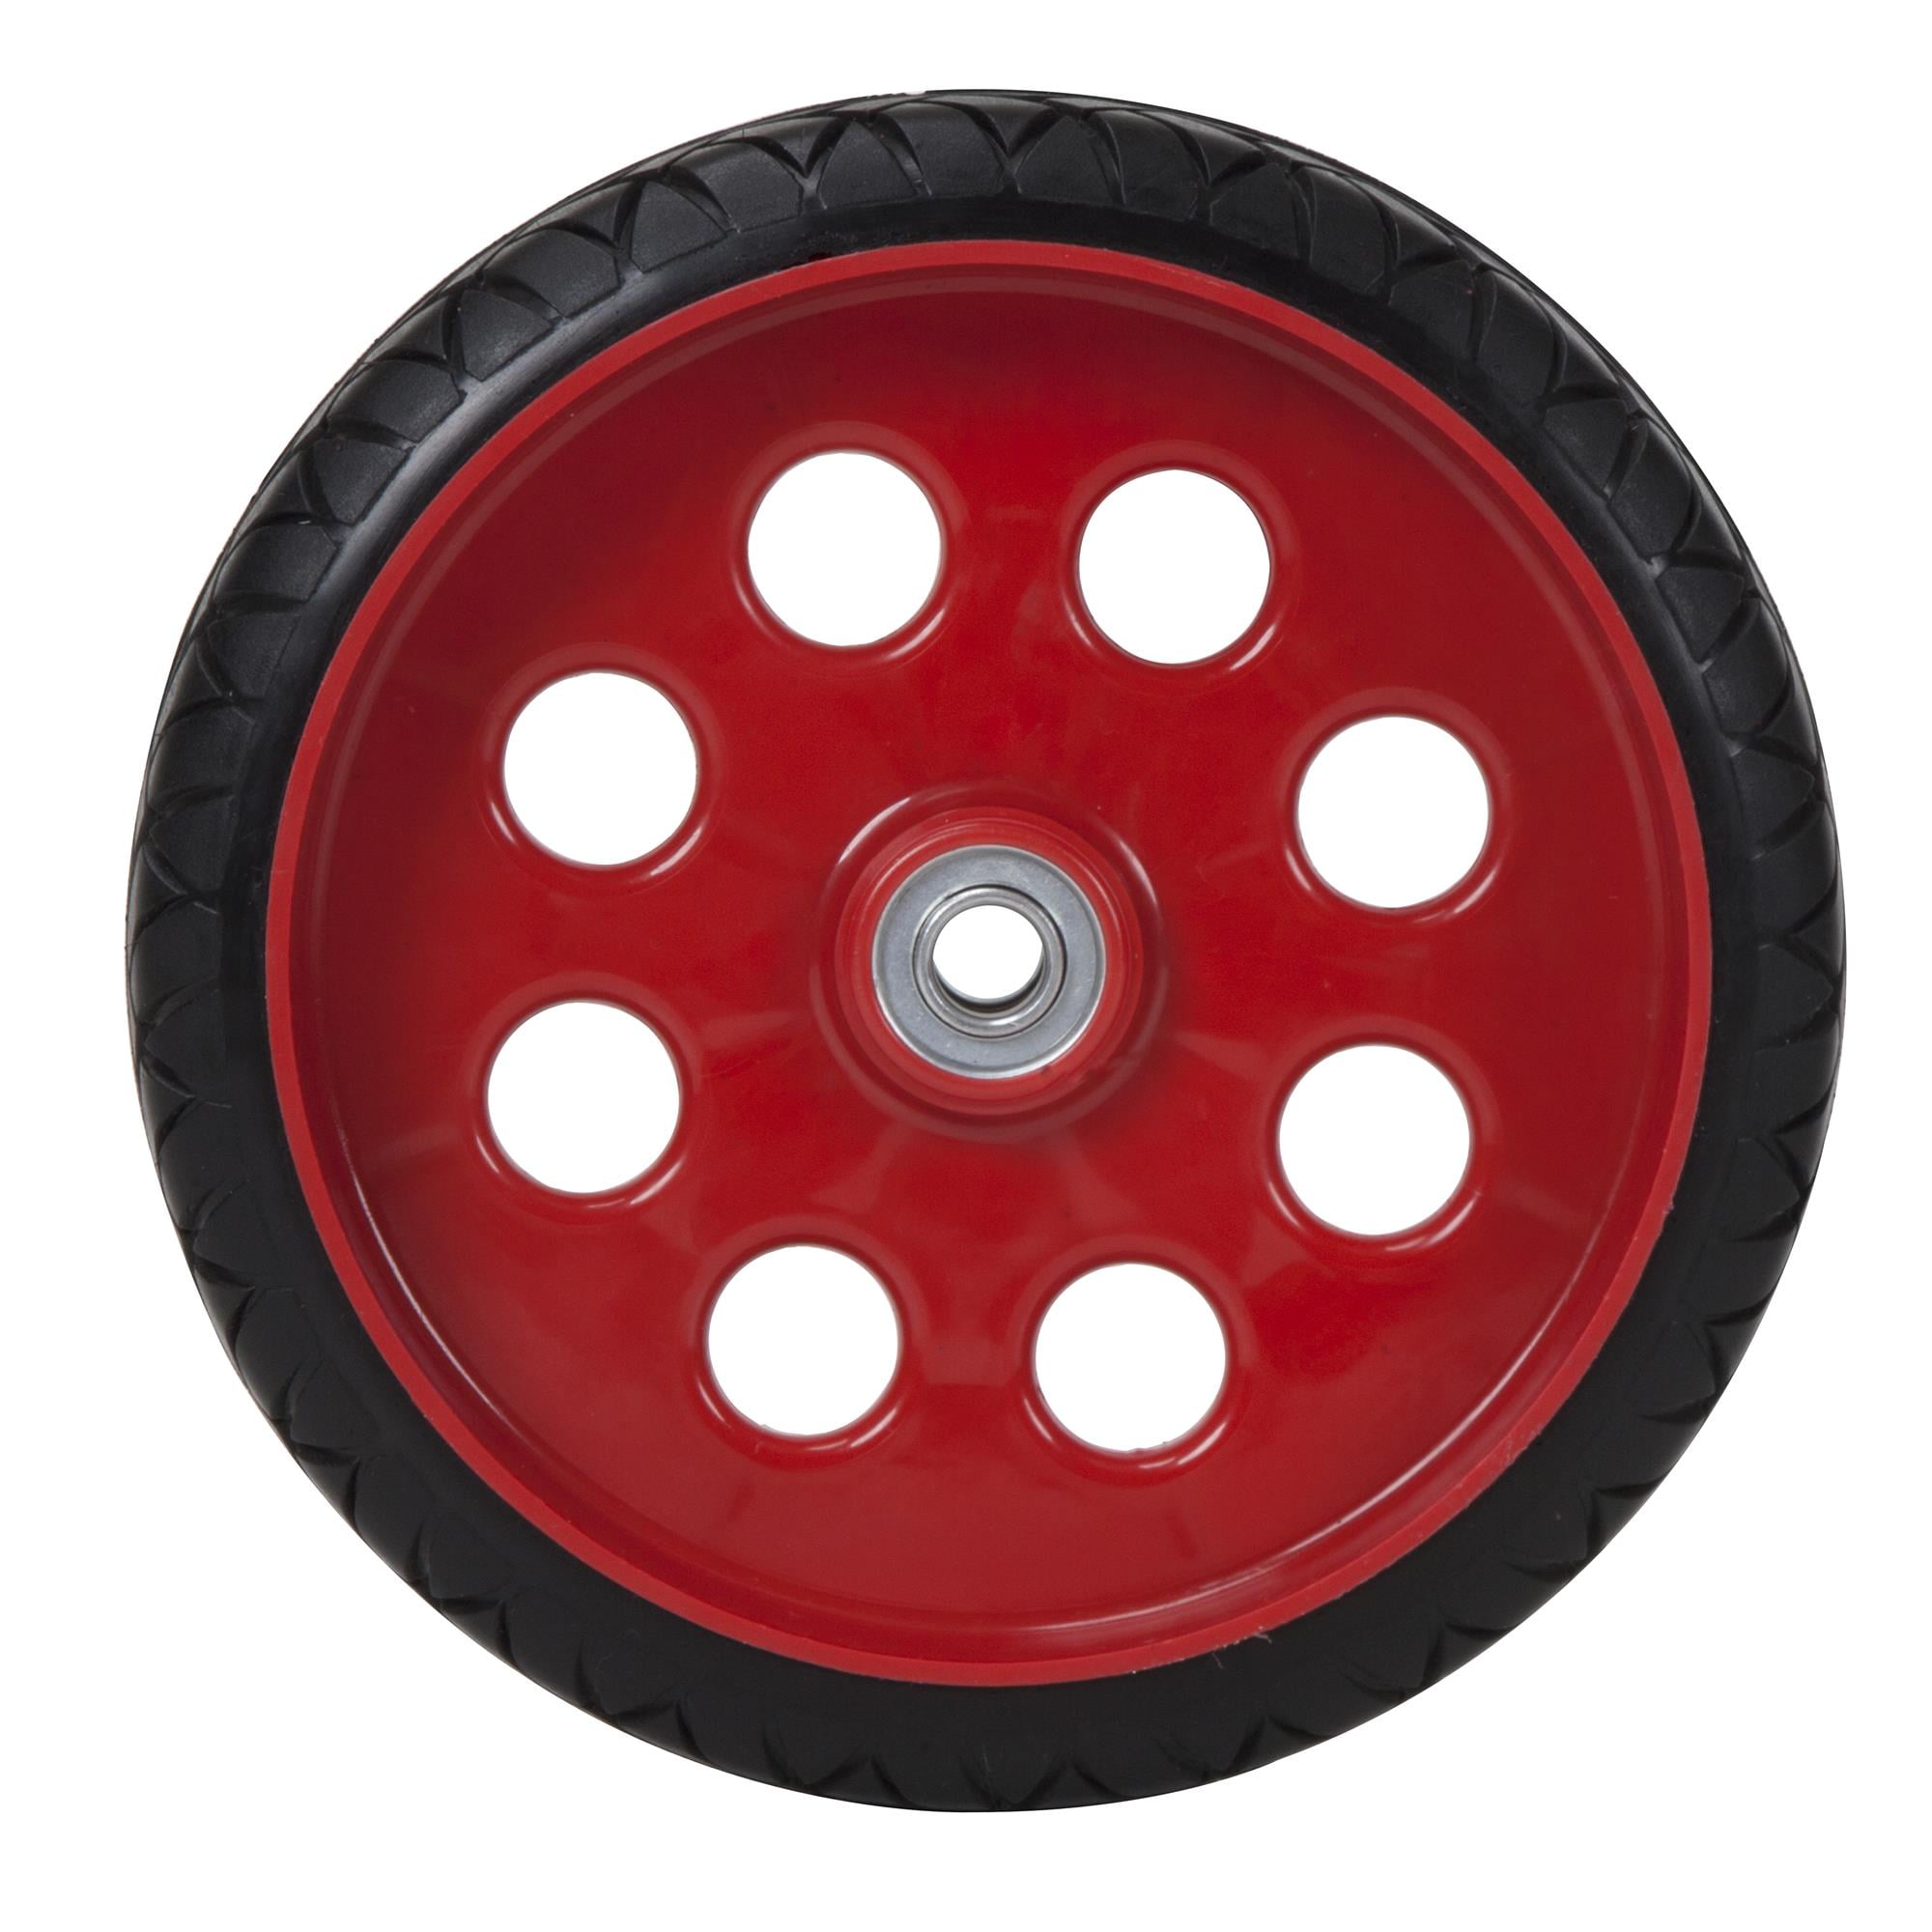 COSCO 10 Inch Low Profile Replacement Wheels for Hand Trucks, Flat-Free,  (Red, 2 Pack)